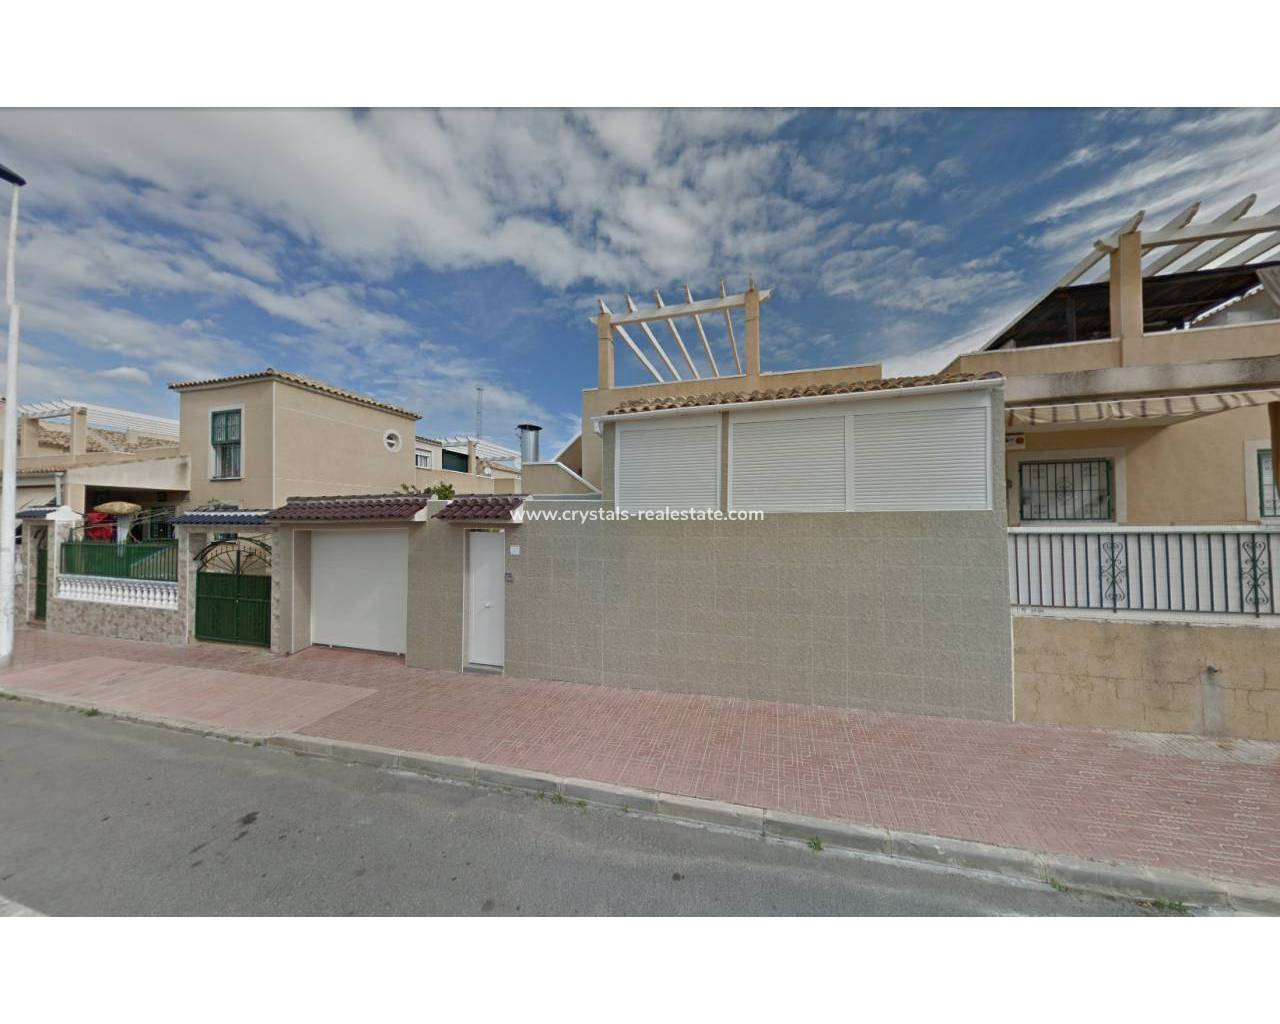 Town house - Resale - Torrevieja - Costa Blanca